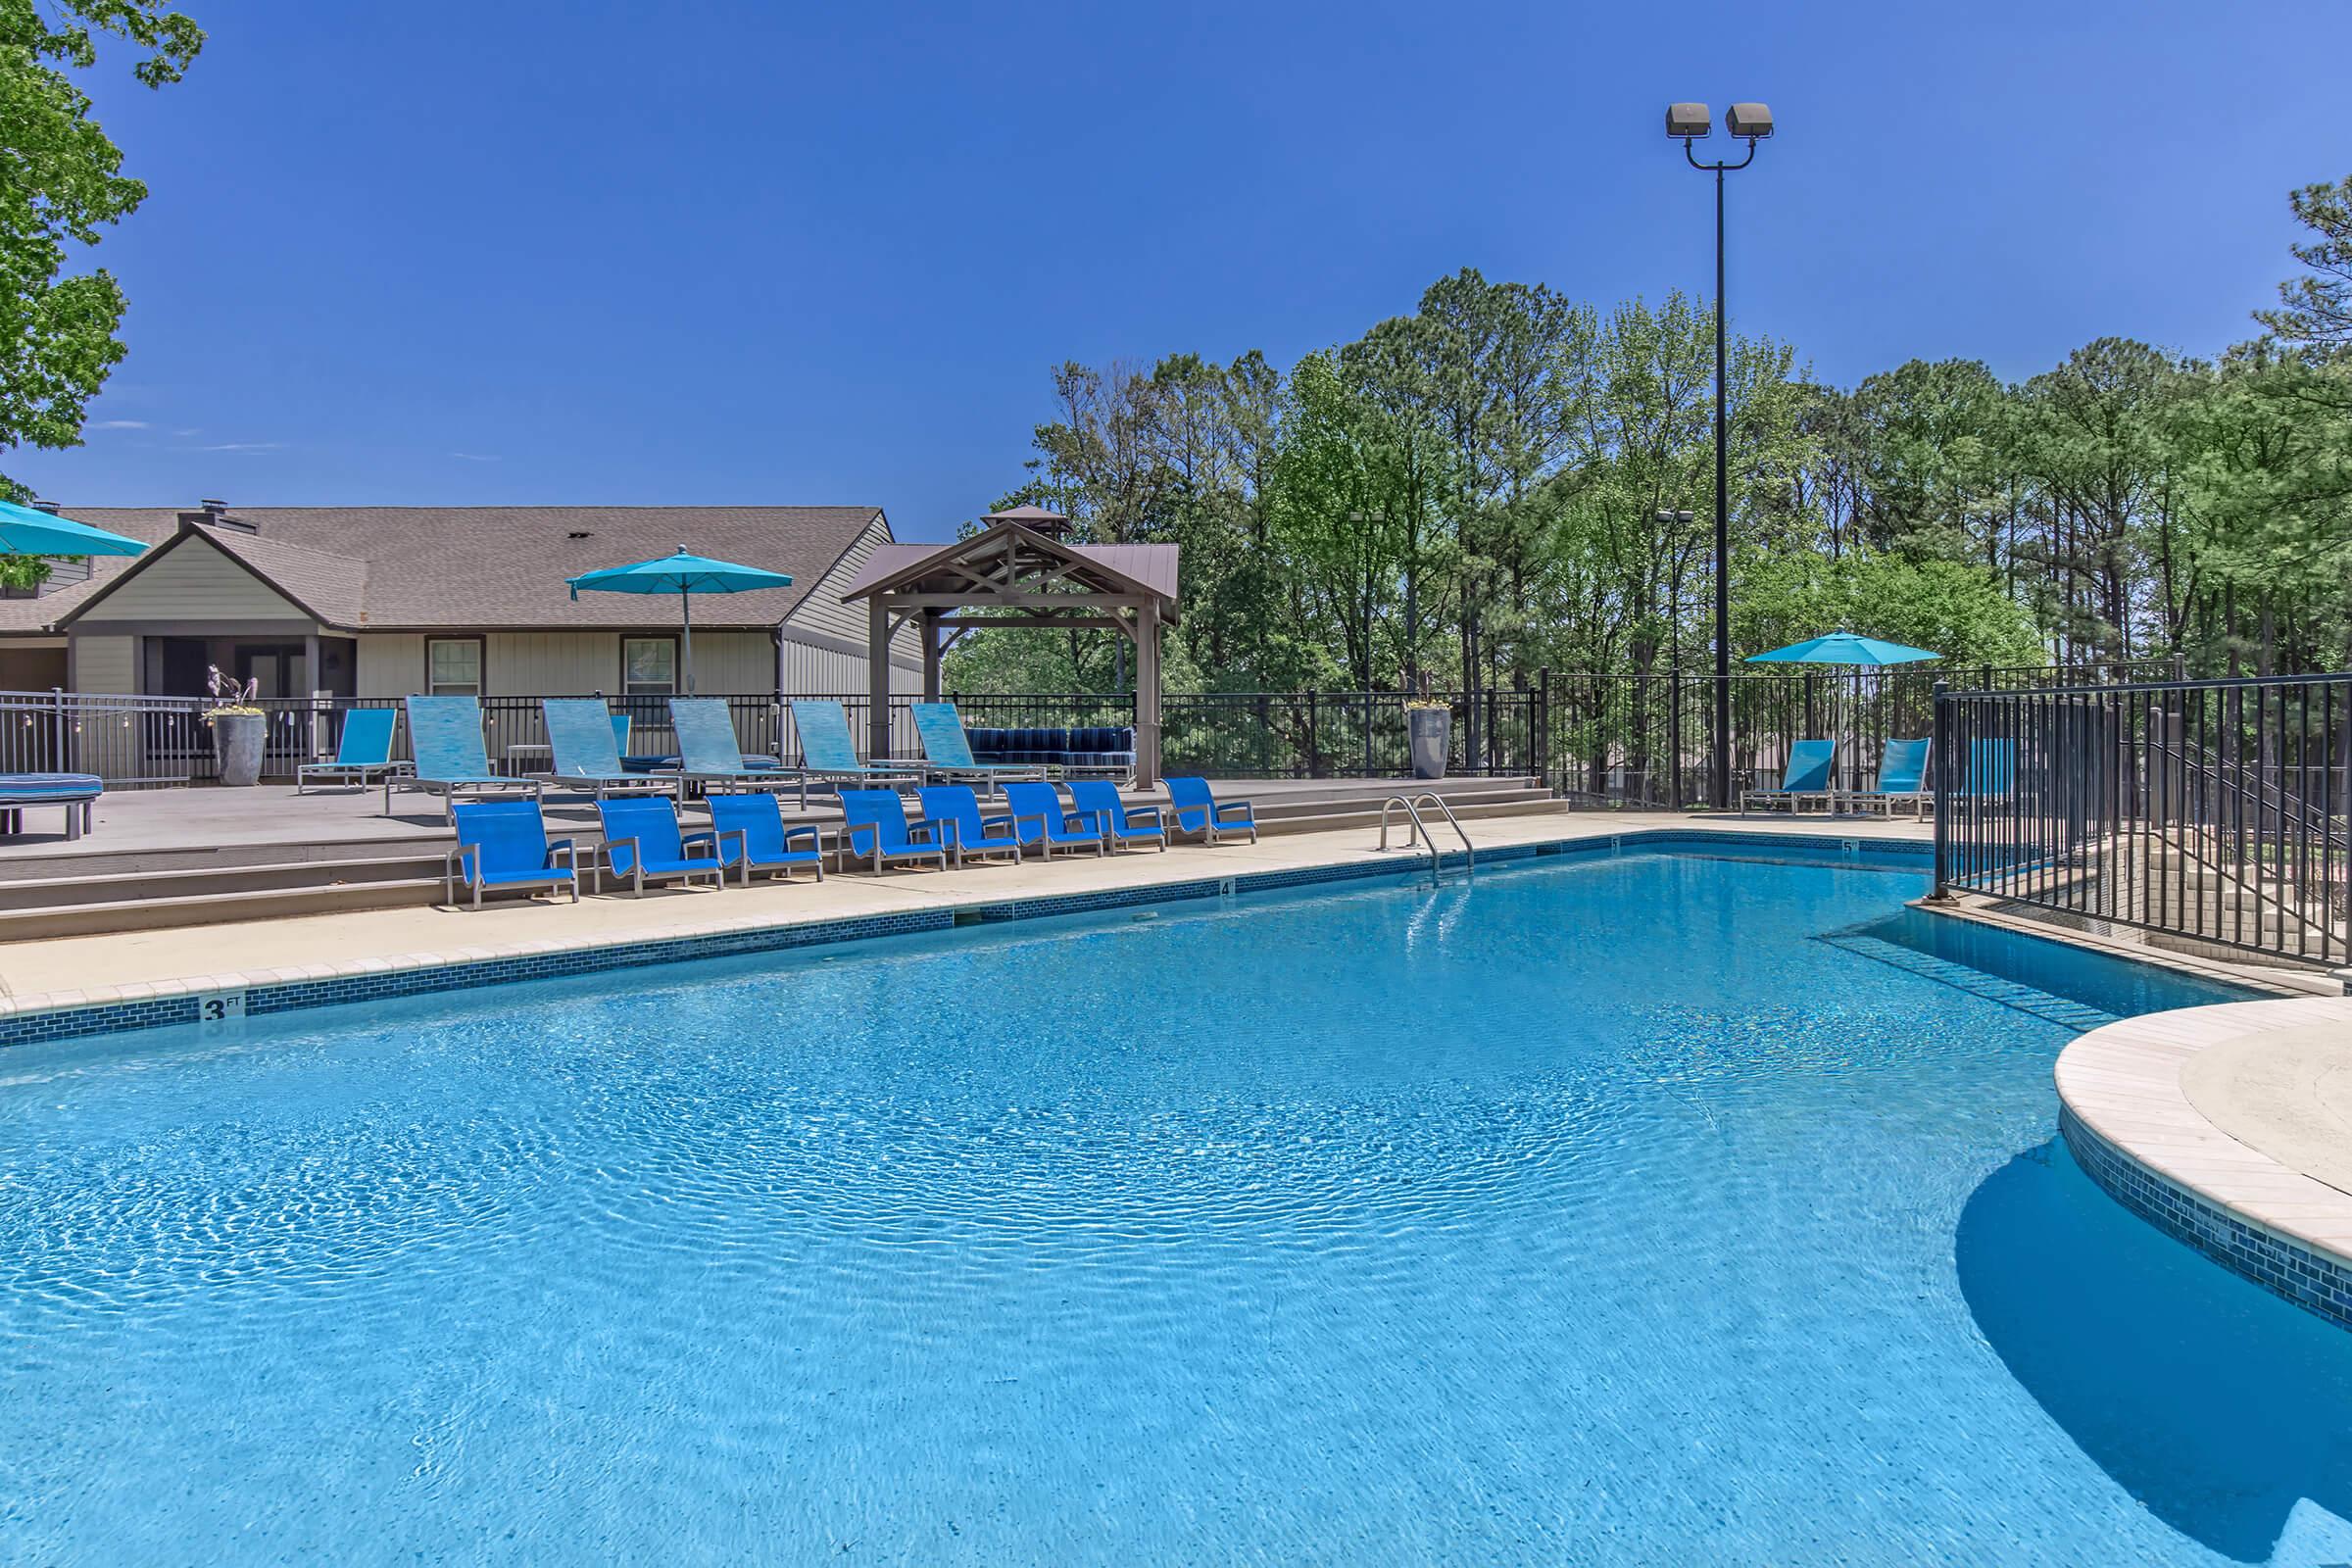 Soak up the sun at the sparkling swimming pool at Madison Landing at Research in Madison, AL